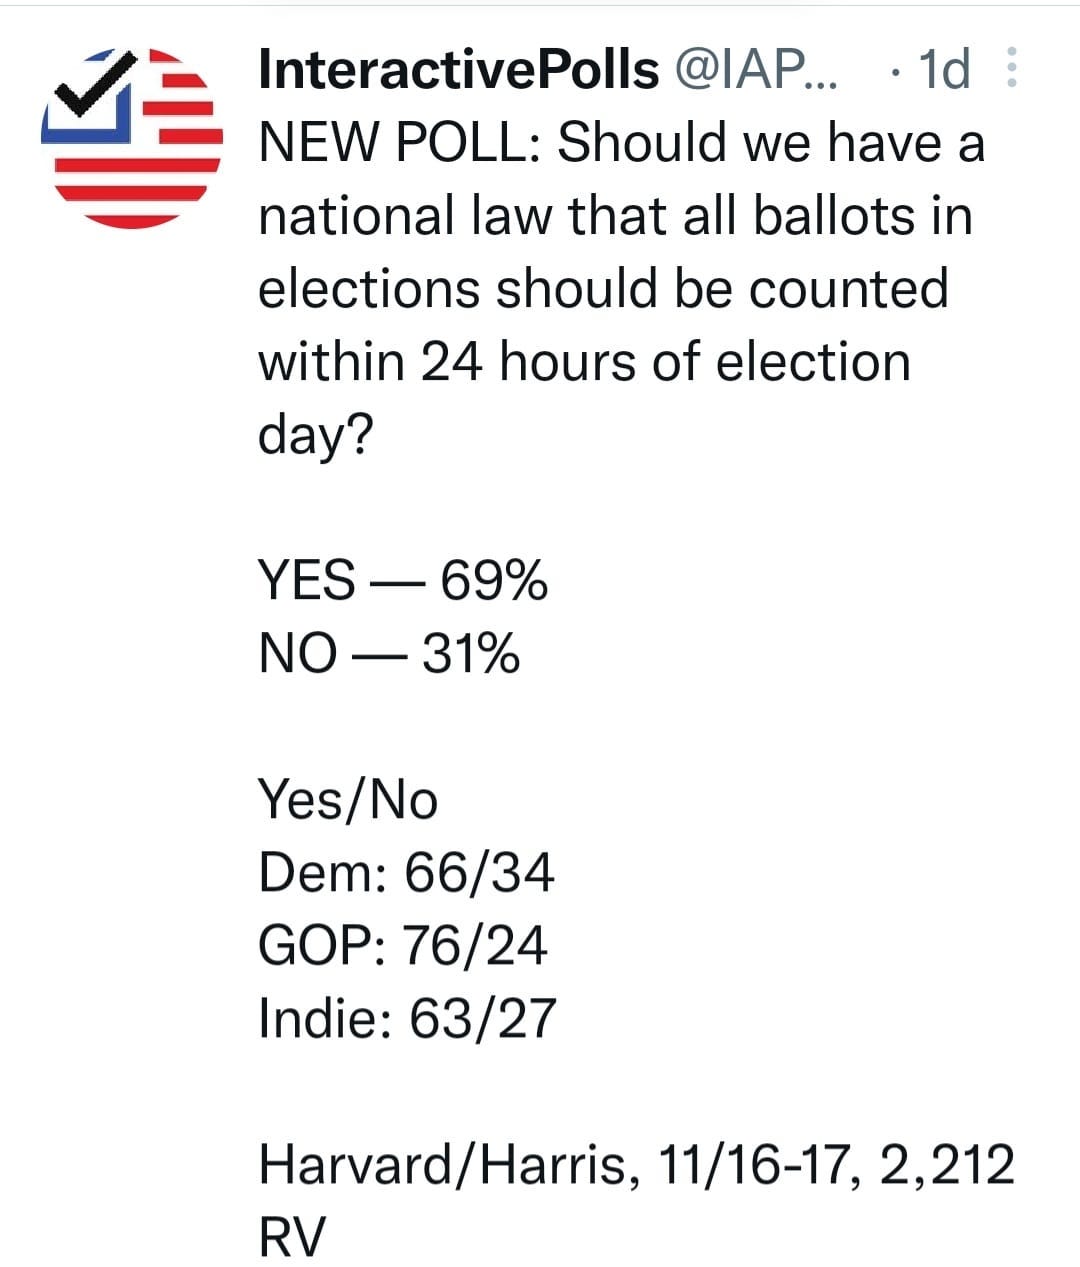 May be an image of text that says 'InteractivePolls @IAP... ・1d NEW POLL: Should we have a national law that all ballots in elections should be counted within 24 hours of election day? YES-69% 69% NO-31% Yes/No Dem: 66/34 34 GOP:76/24 Indie: 63/27 Harvard/Har RV 11/16-17, 2,212'